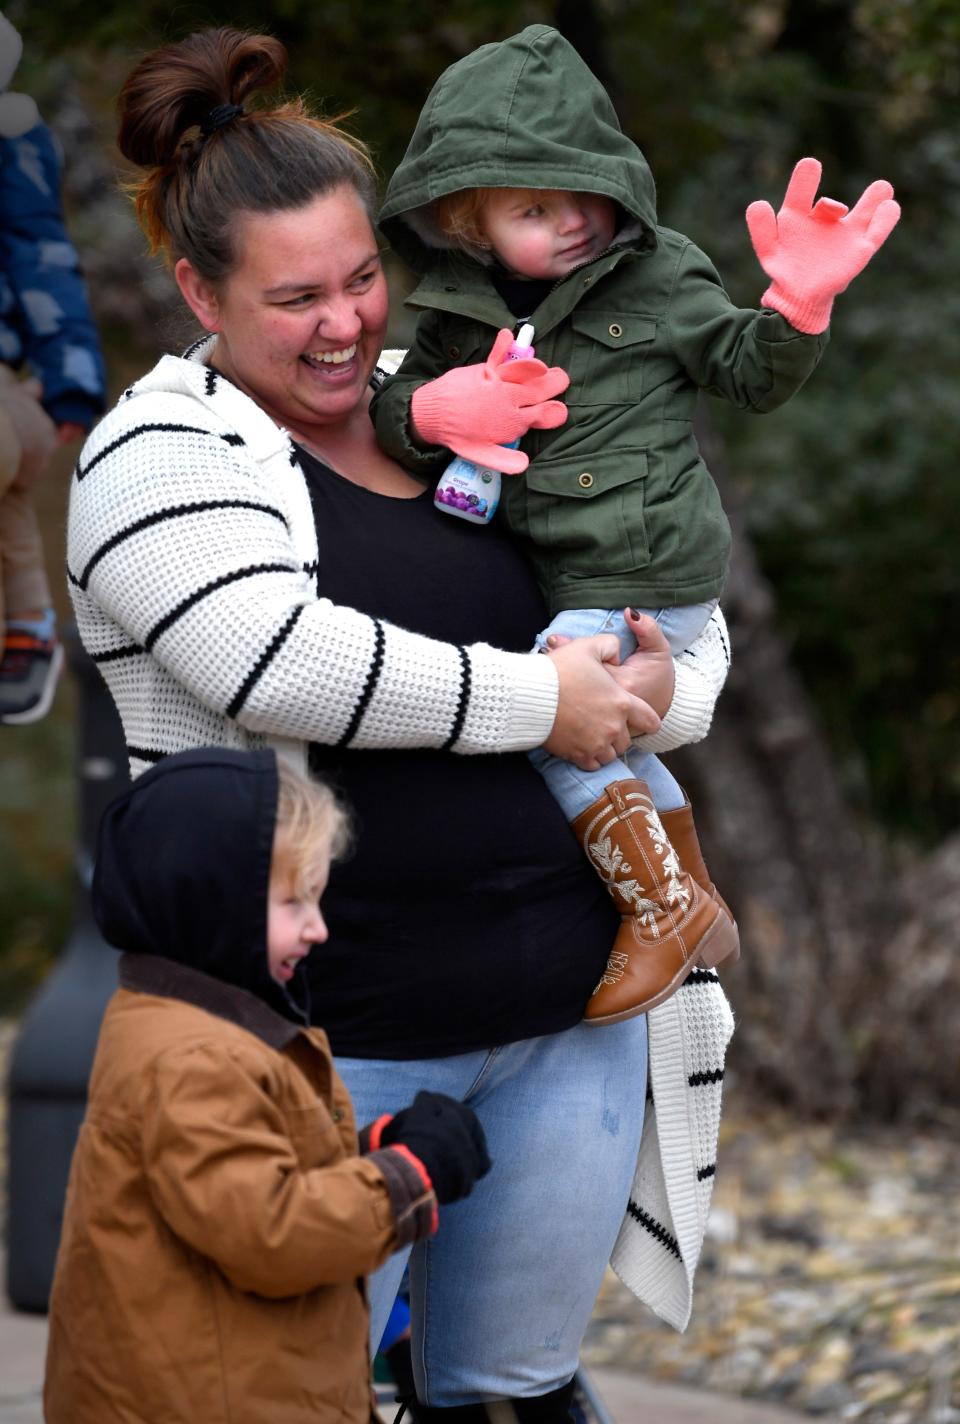 Emma Belsky, 2, waves from her mother's arms as Santa Claus arrives. Emma's brother Elliot, 5, stands close to their mother Brittney, who said they recently had moved to Abilene.